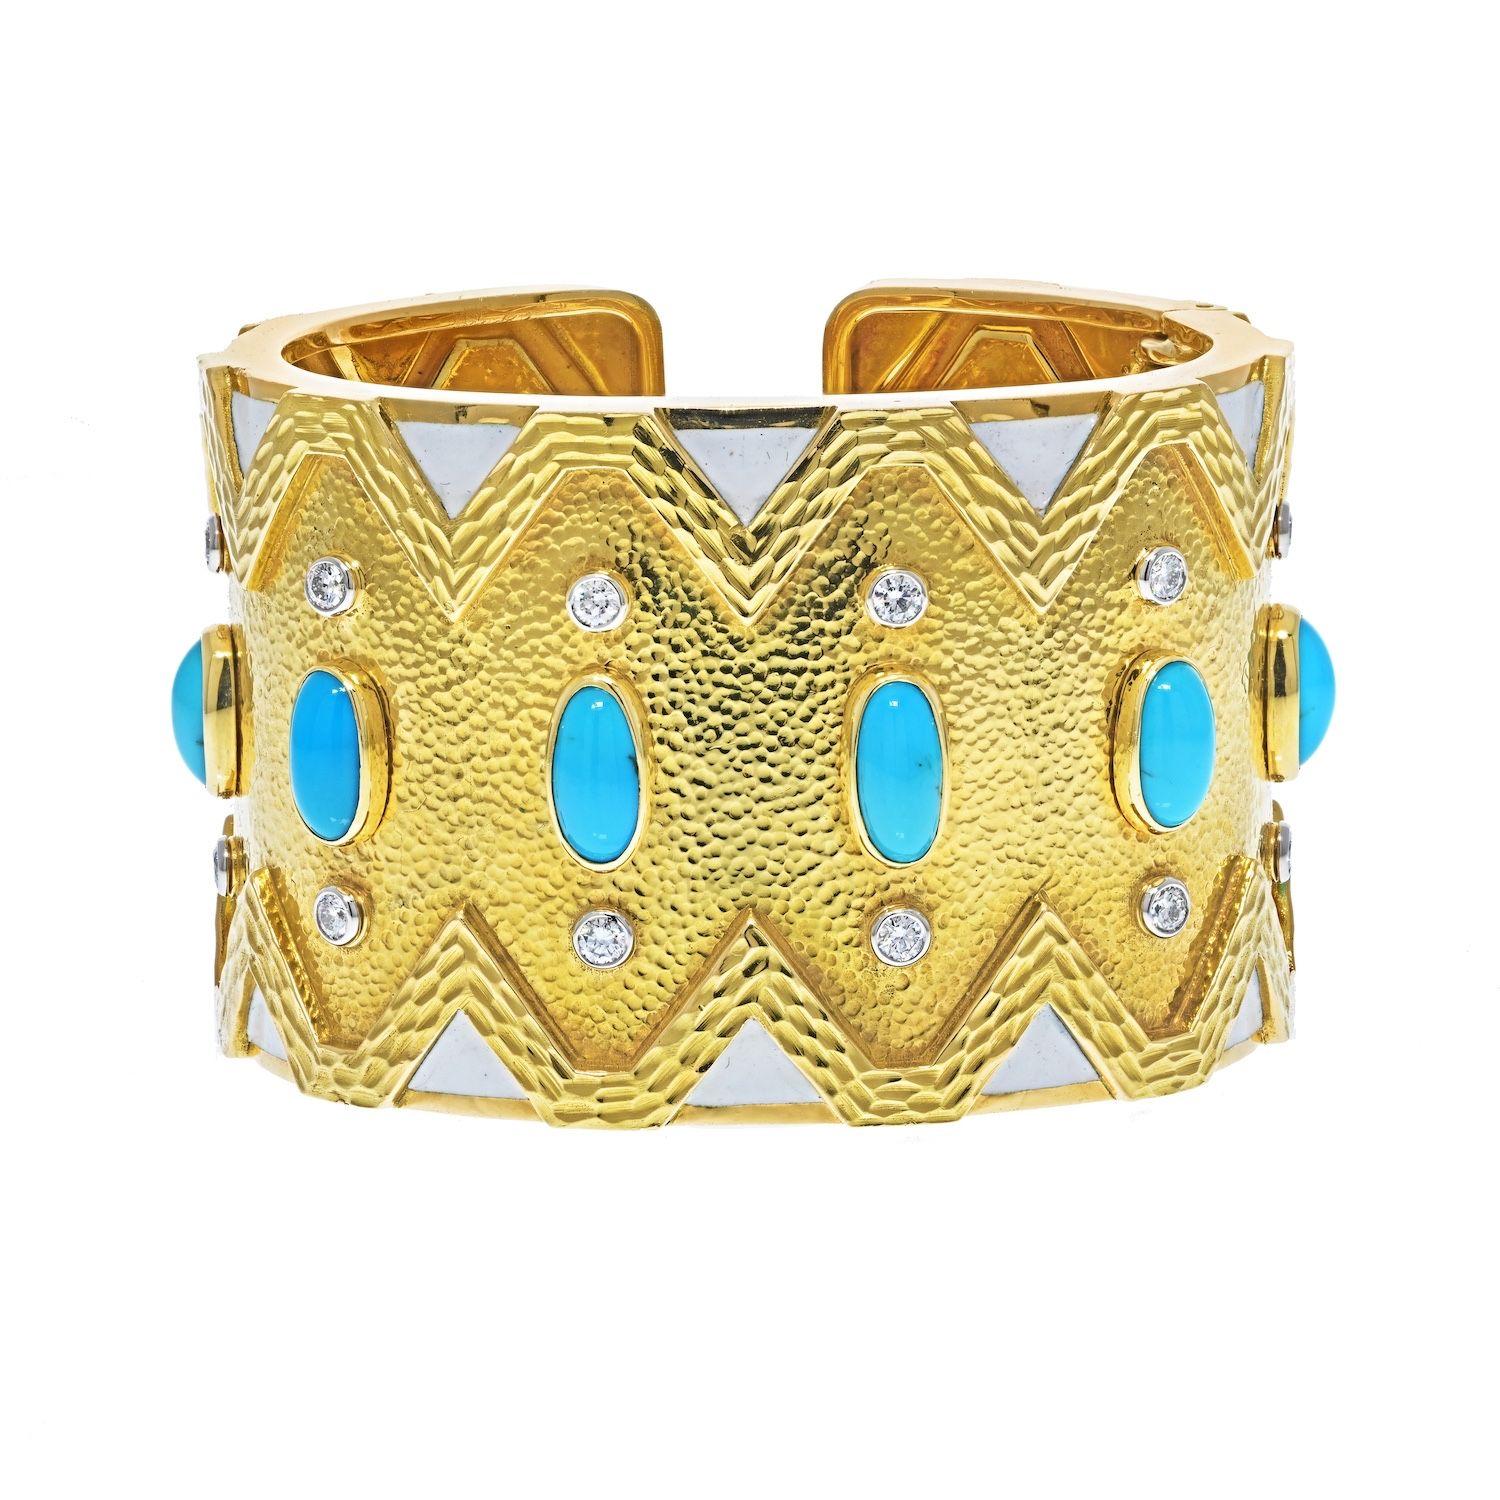 David Webb white enamel and turquoise Rickrack cuff bracelet in 18k yellow gold, accompanied by a David Webb box and David Webb Certificate of Authenticity.
·     Diamonds weighing a total of approximately 1.50 carats
·     Internal circumference 6¼